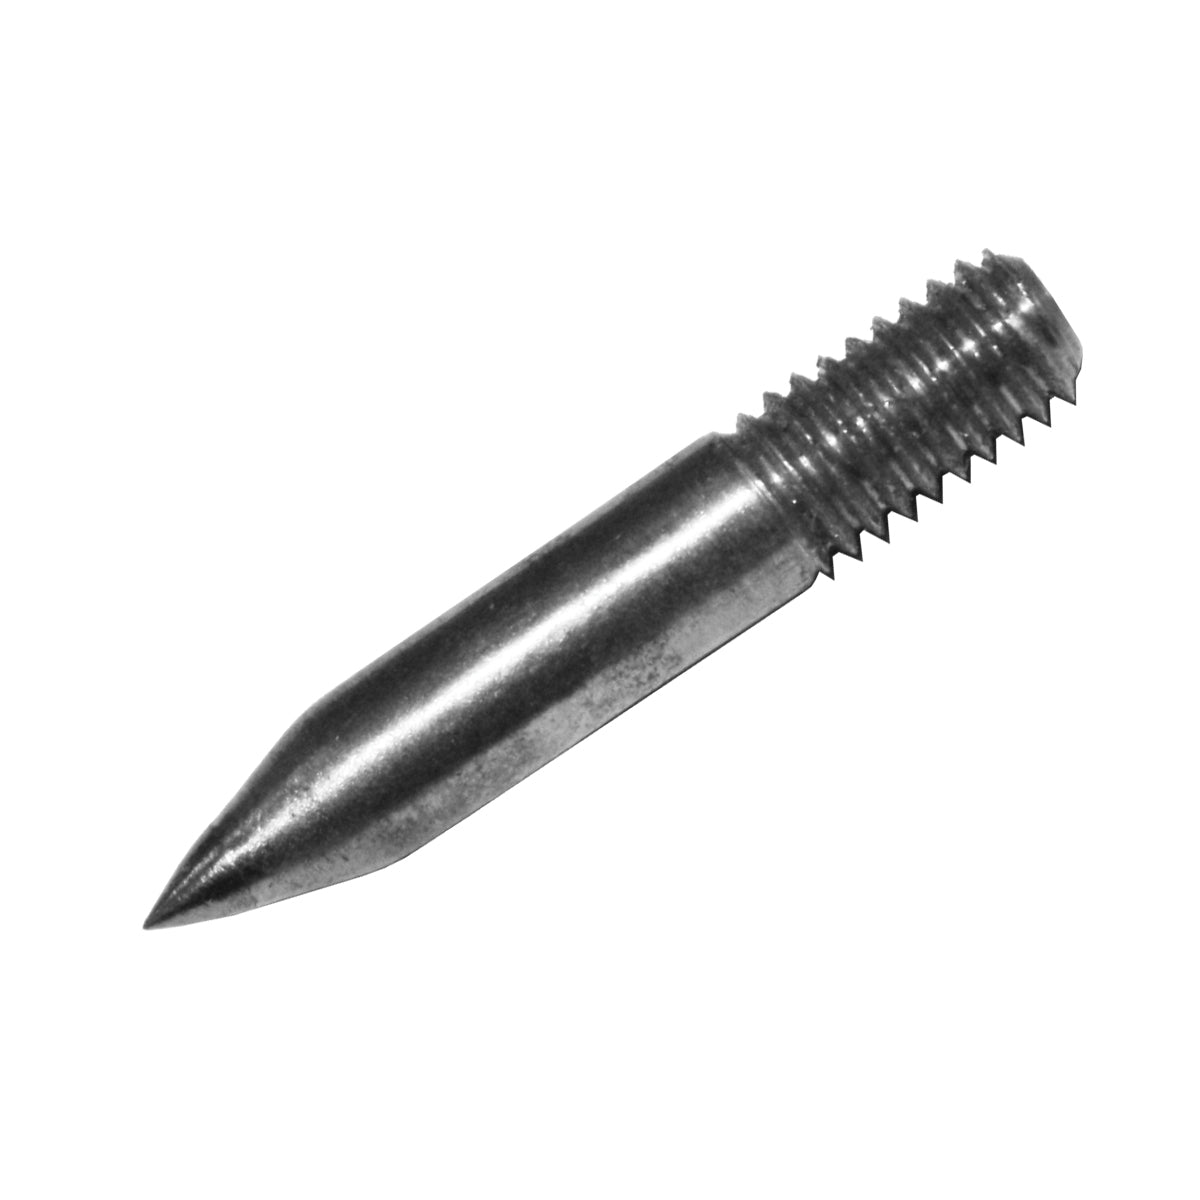 SitePro 17-201-10 Carbide Replacement Tip for Concrete Scribe